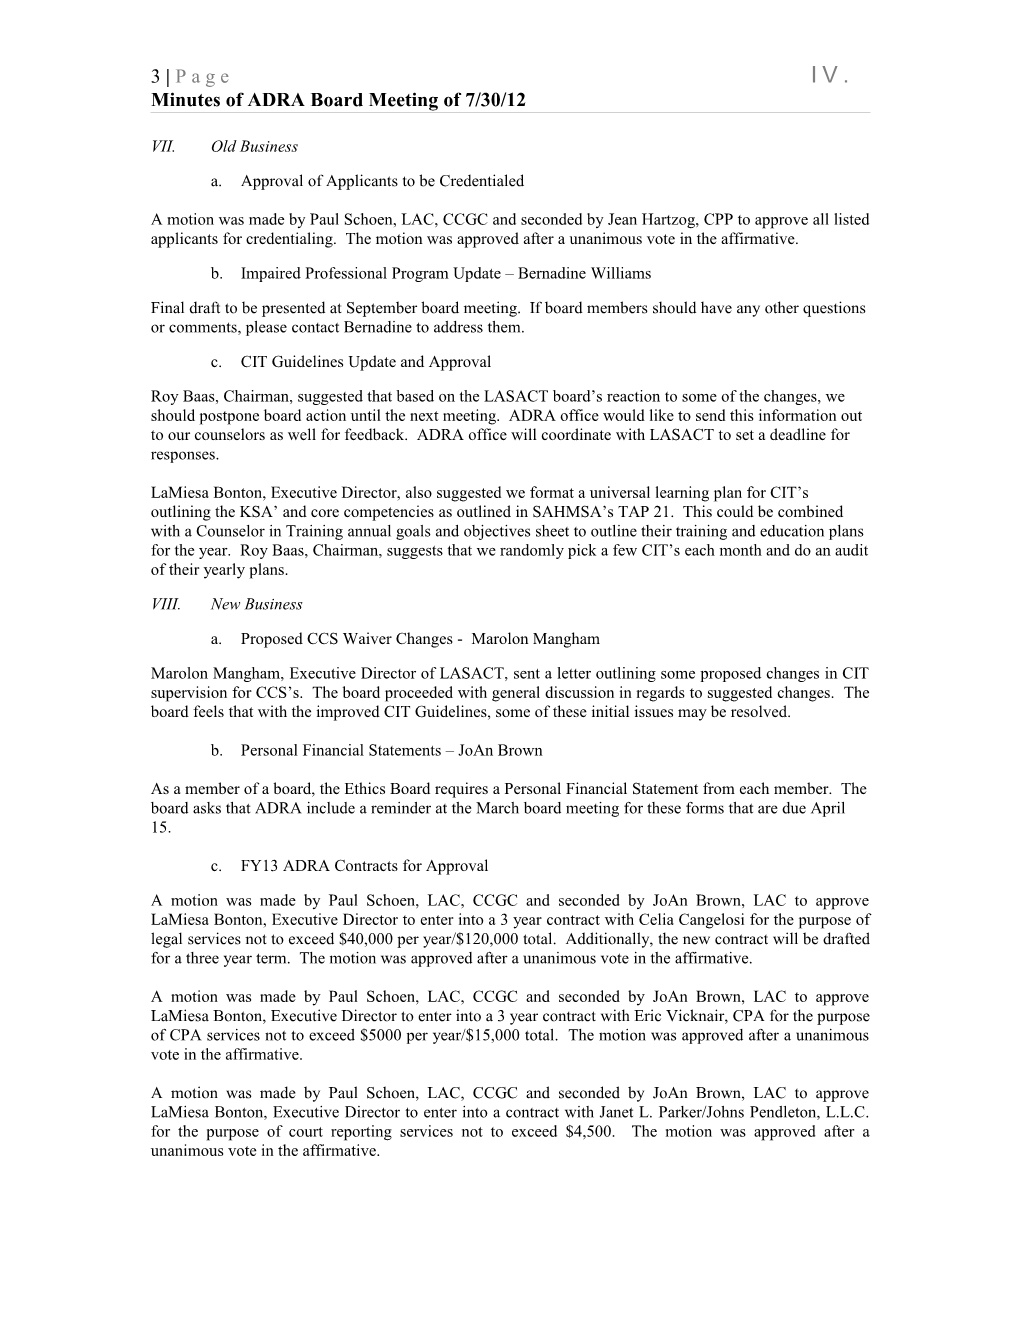 Minutes of ADRA Board Meeting of 7/30/12